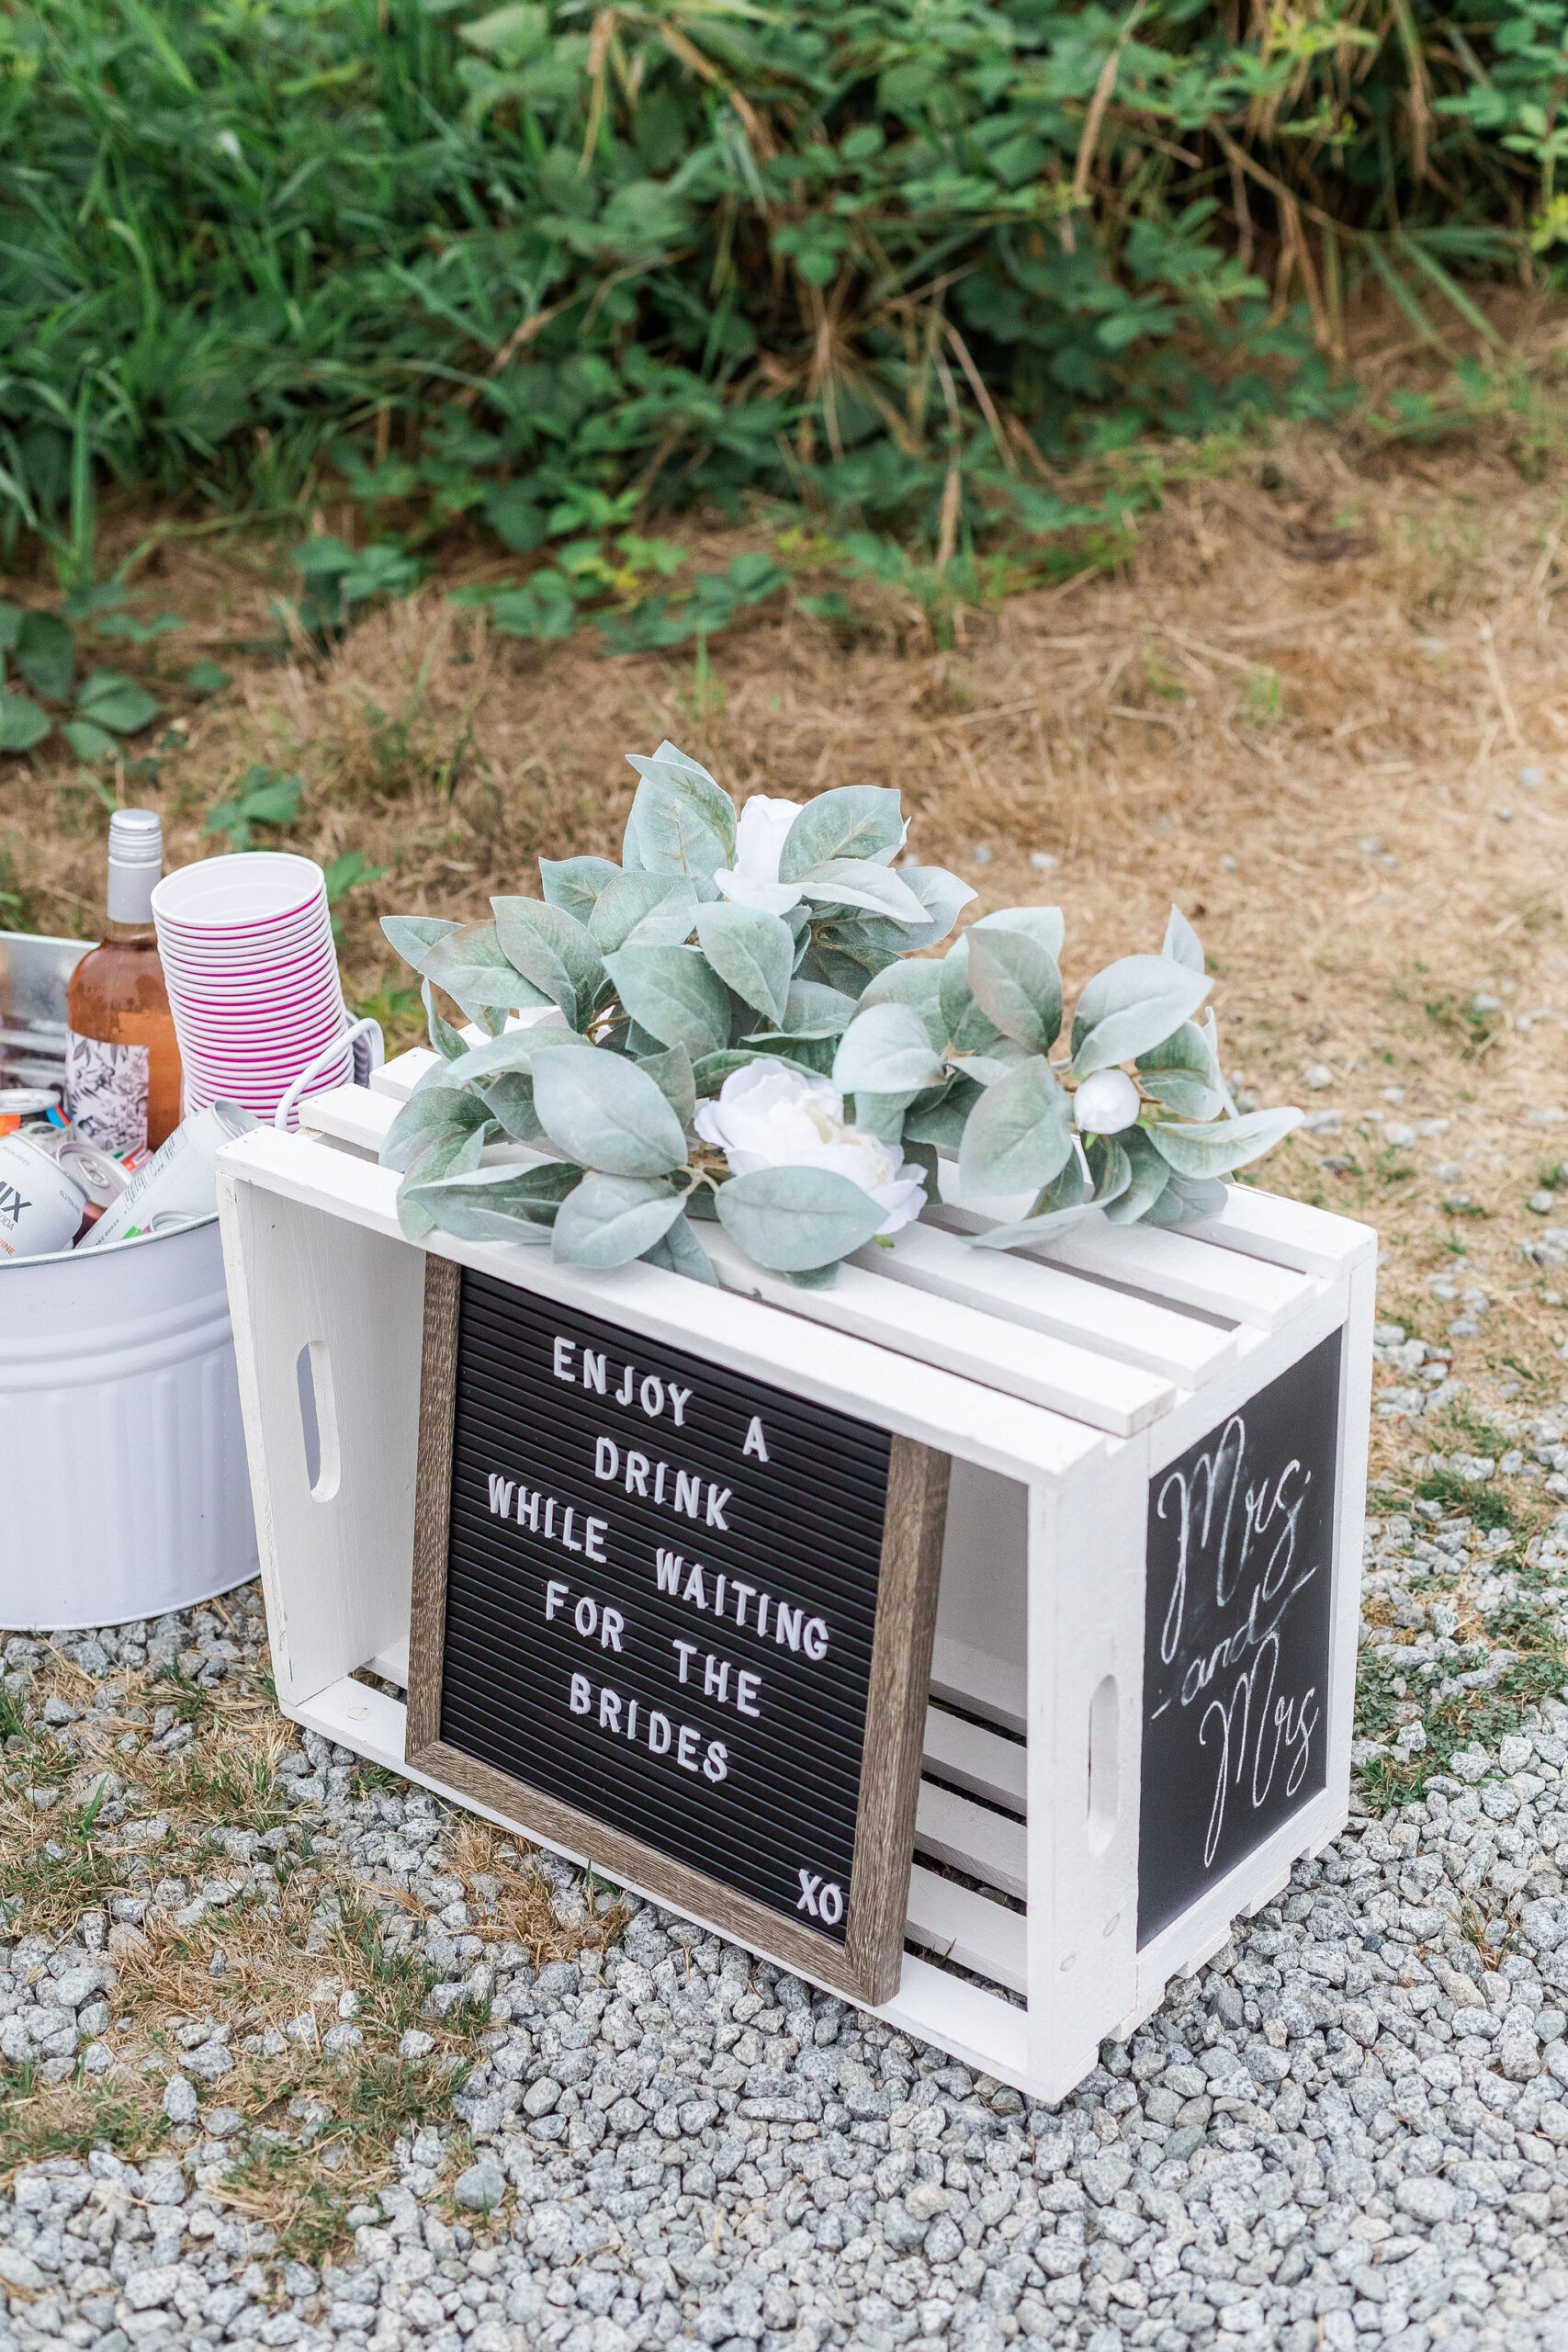 fun ideas for your wedding ceremony, serve drinks before the wedding